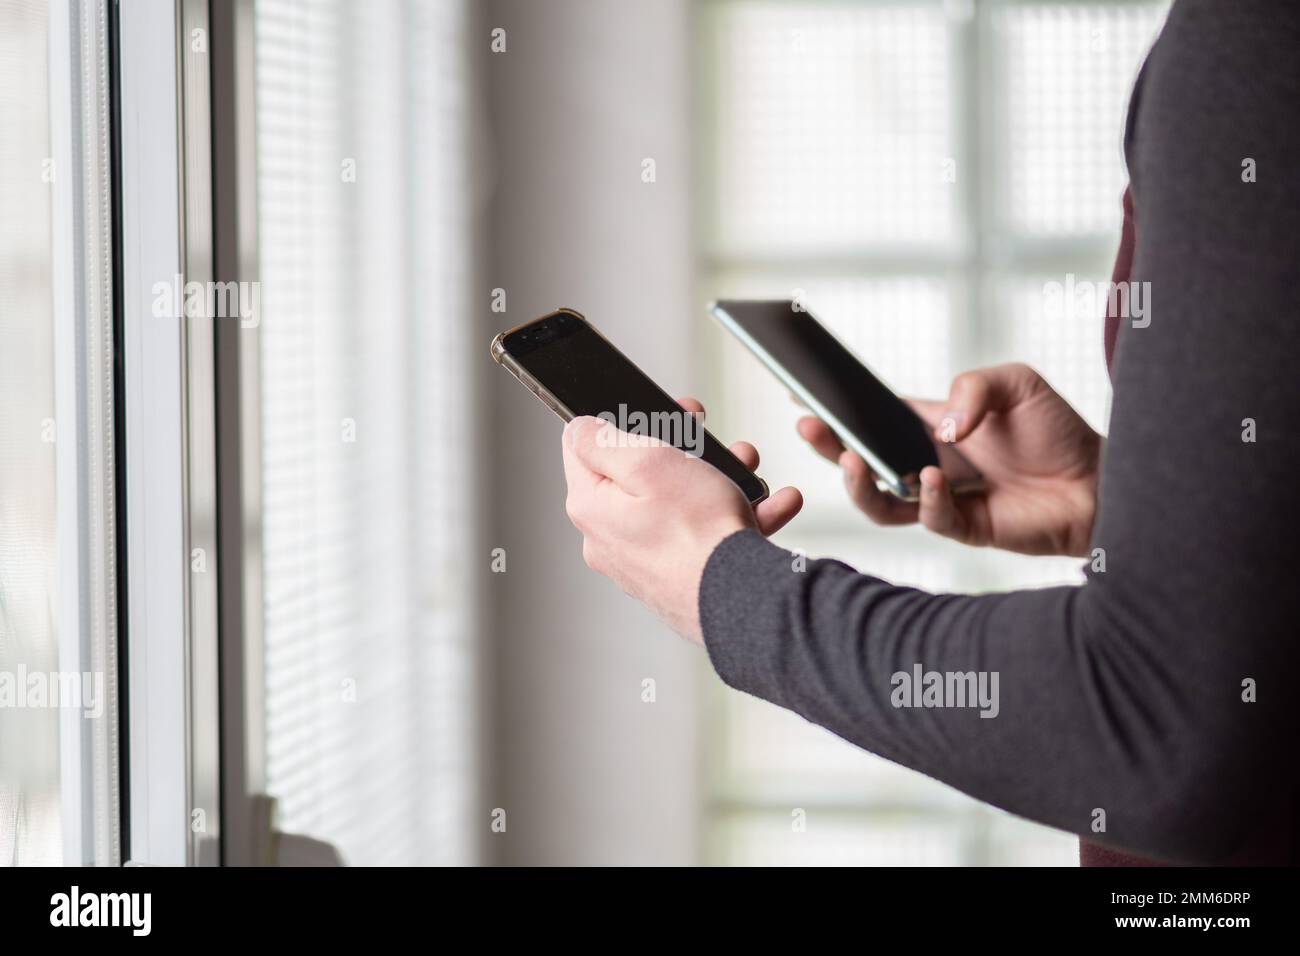 Close up of a man holding two smartphones. Man using two phones at the same time.Busy man standing next to windows and using two smartphones. Stock Photo